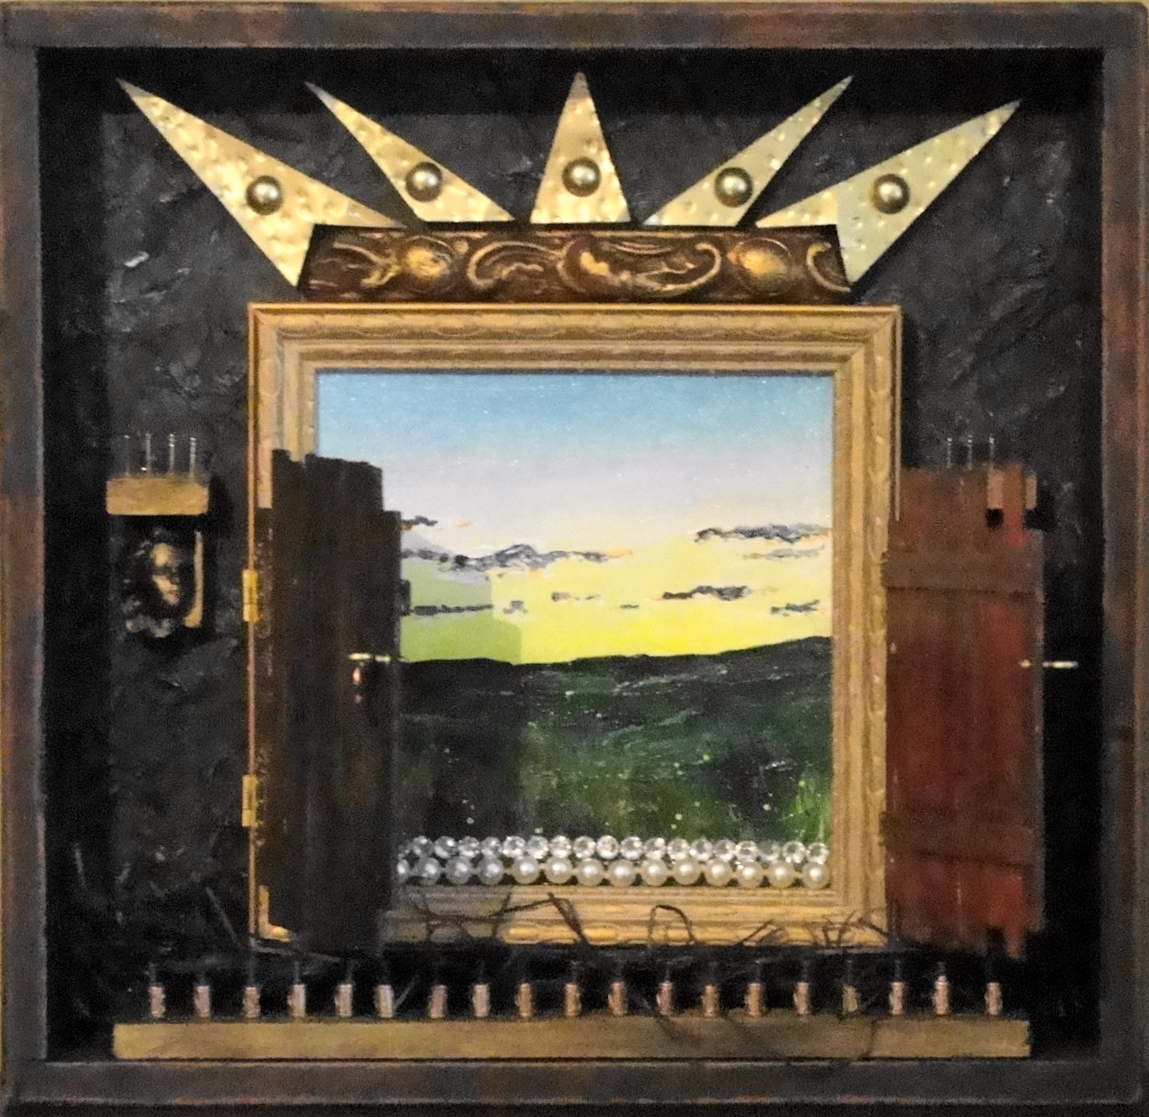 Inset into a frame is a small framed landscape painting of a field. A little wooden gate is attached in front of this painting with a latch with which the gate can be opened to see the field. Above the field picture is a hammered brass crown. A small plaster head of an angel sits at each side of the field painting.